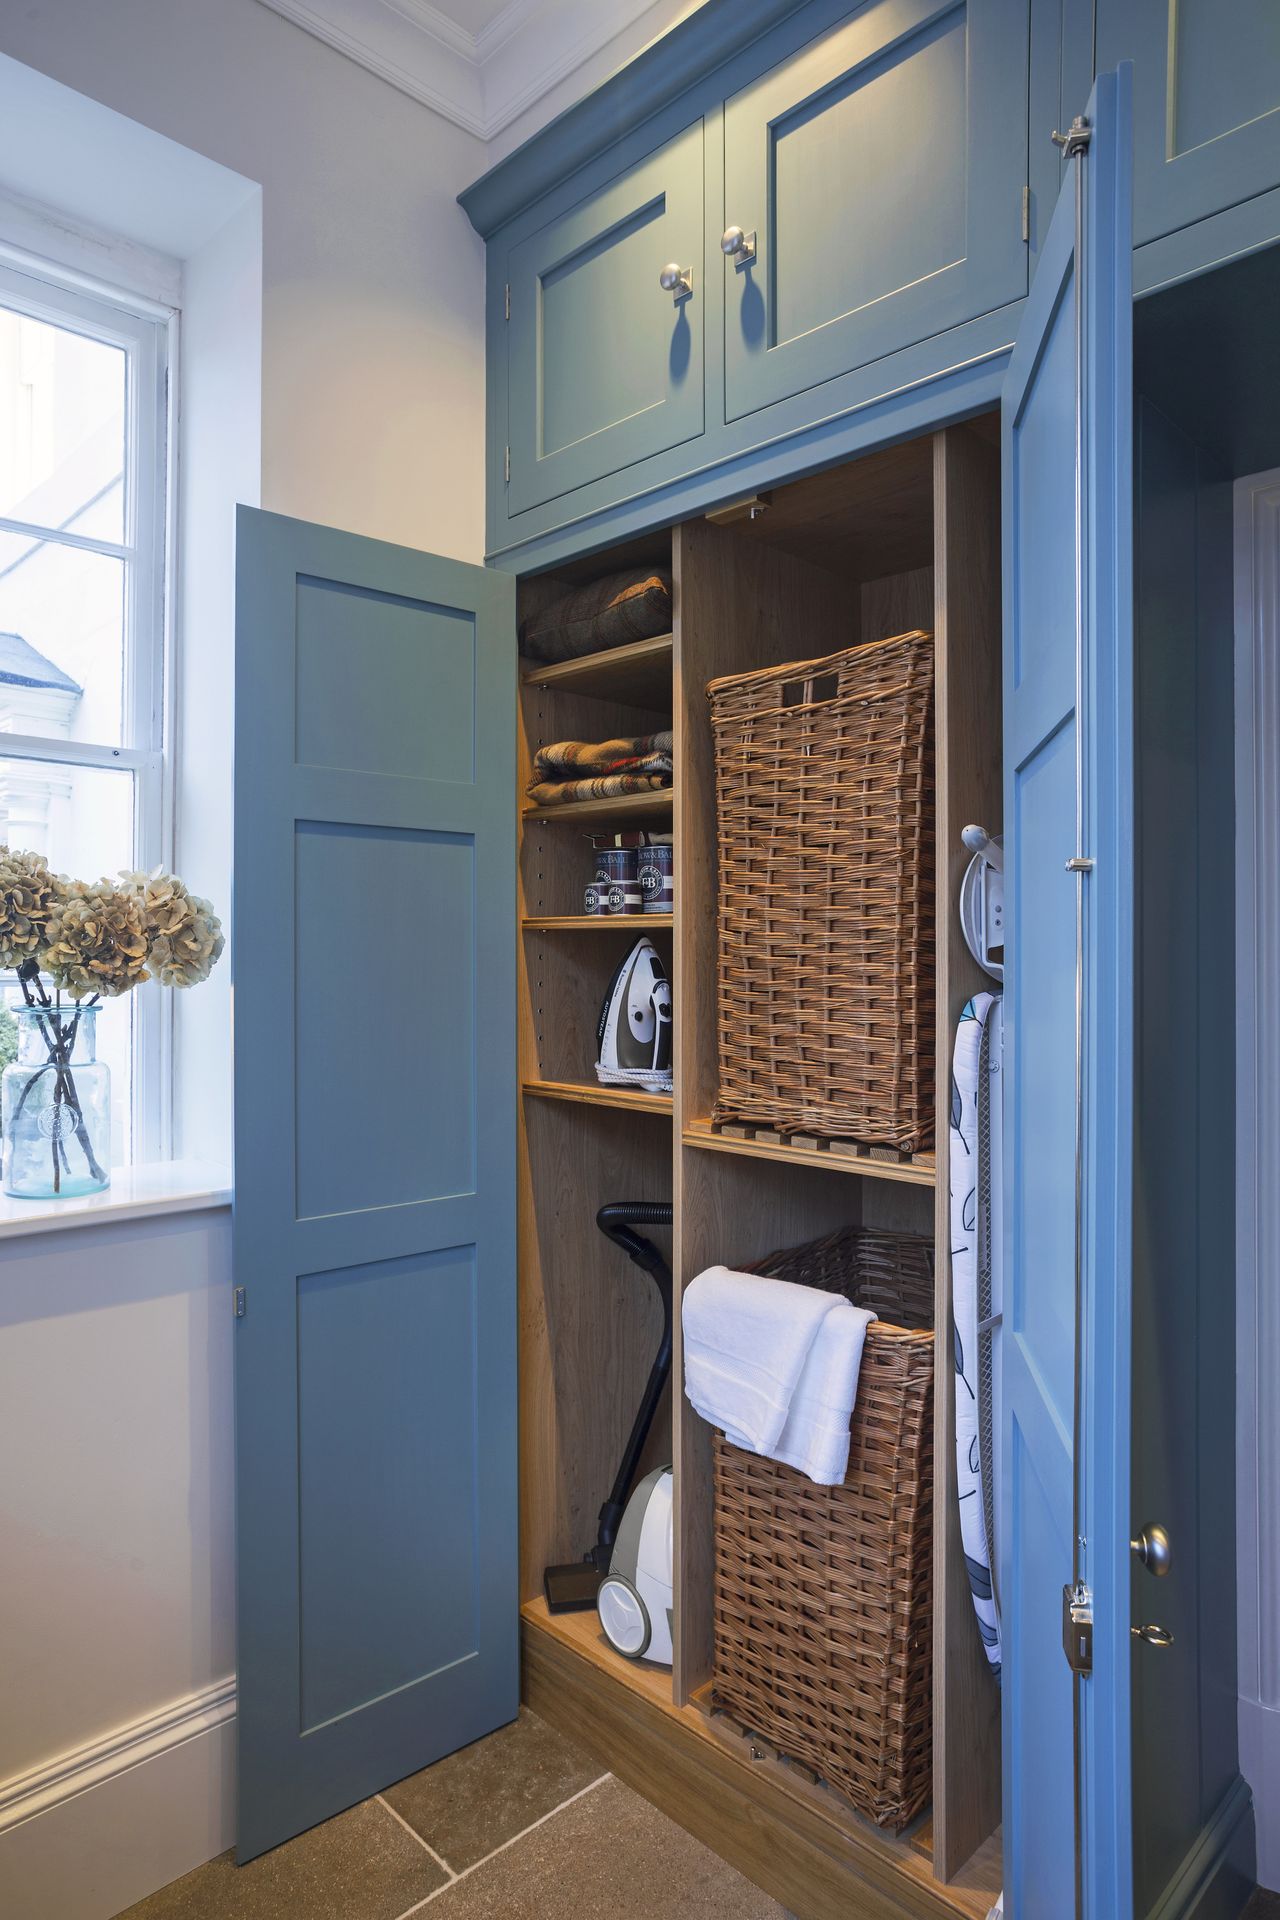 Utility room storage ideas: 16 neat solutions for tidy areas